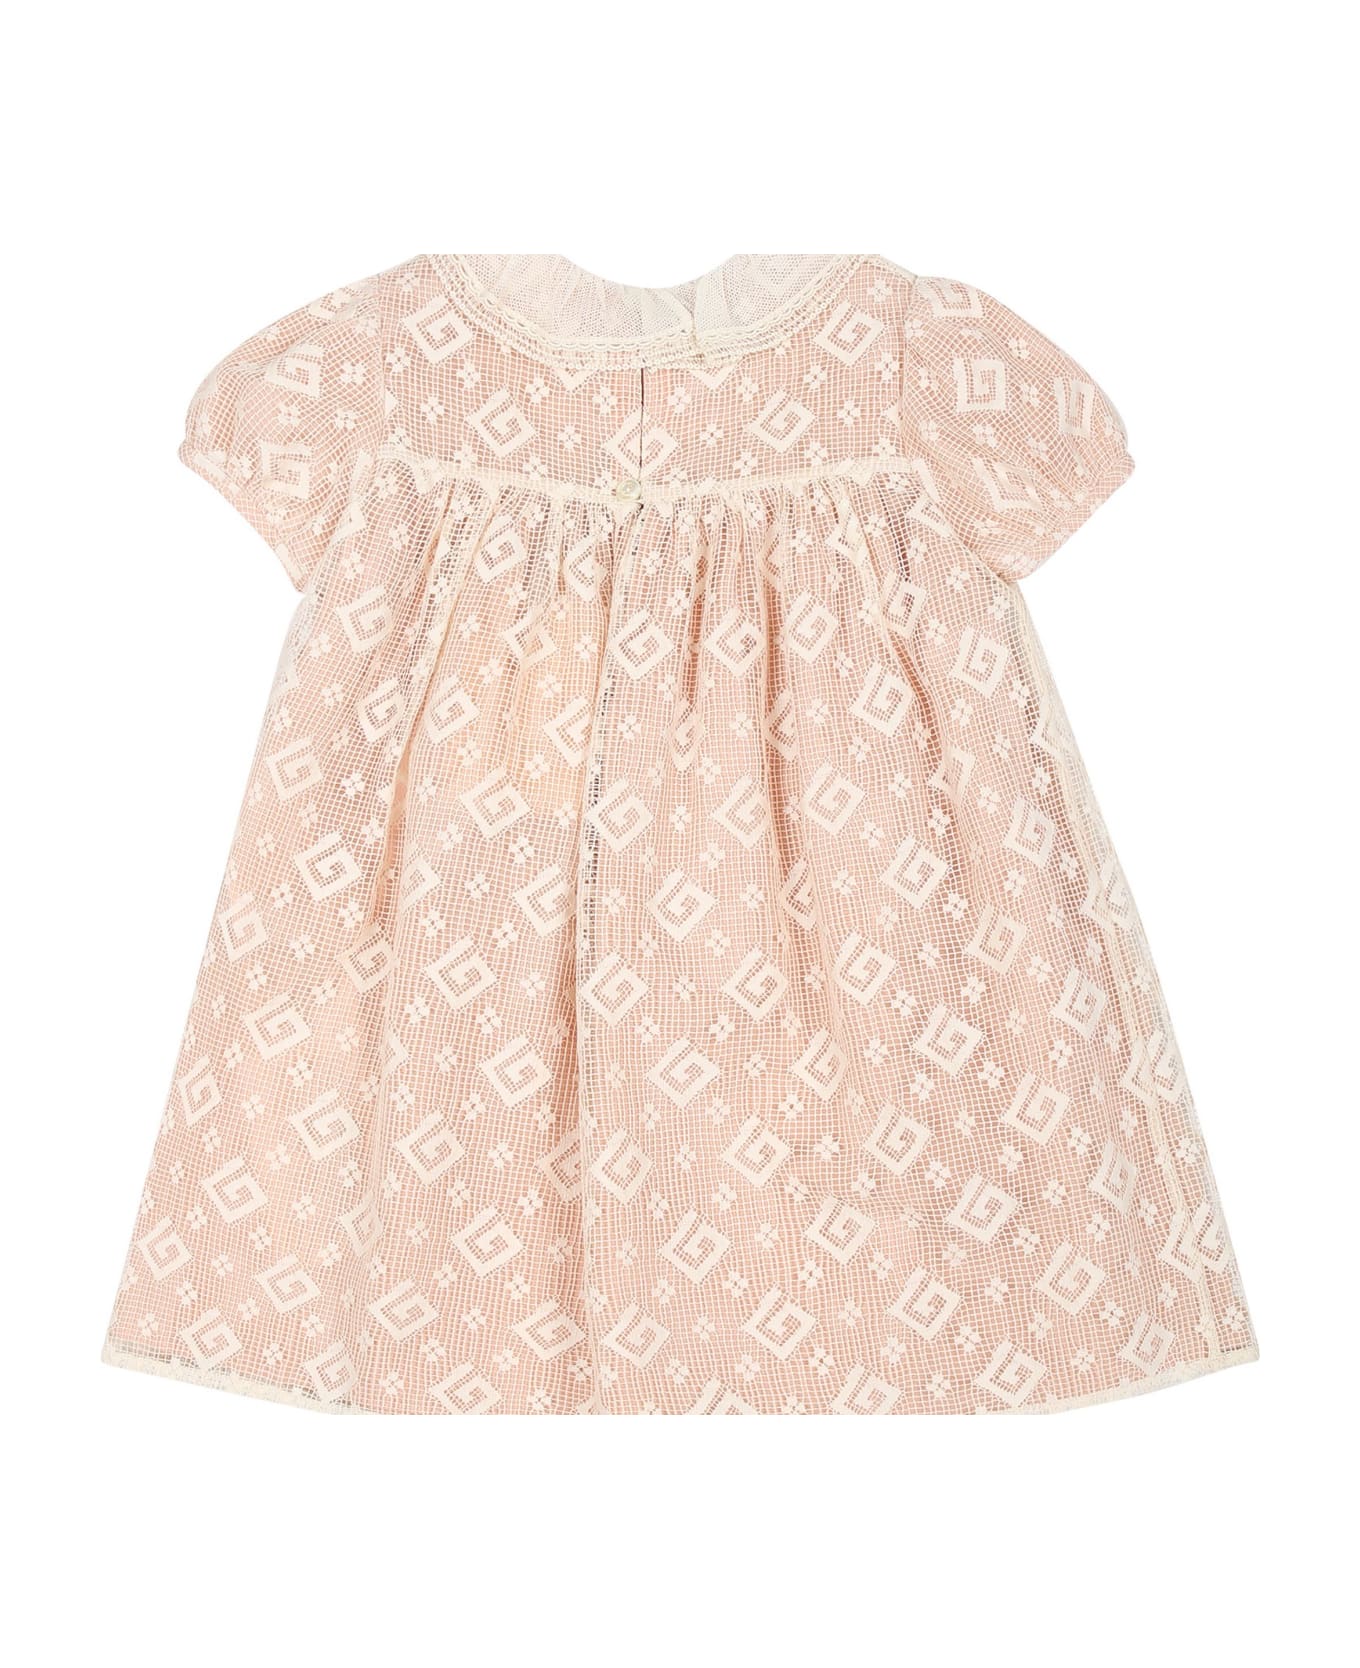 Gucci Pink Dress For Baby Girl With G Quadro Motif - Pink